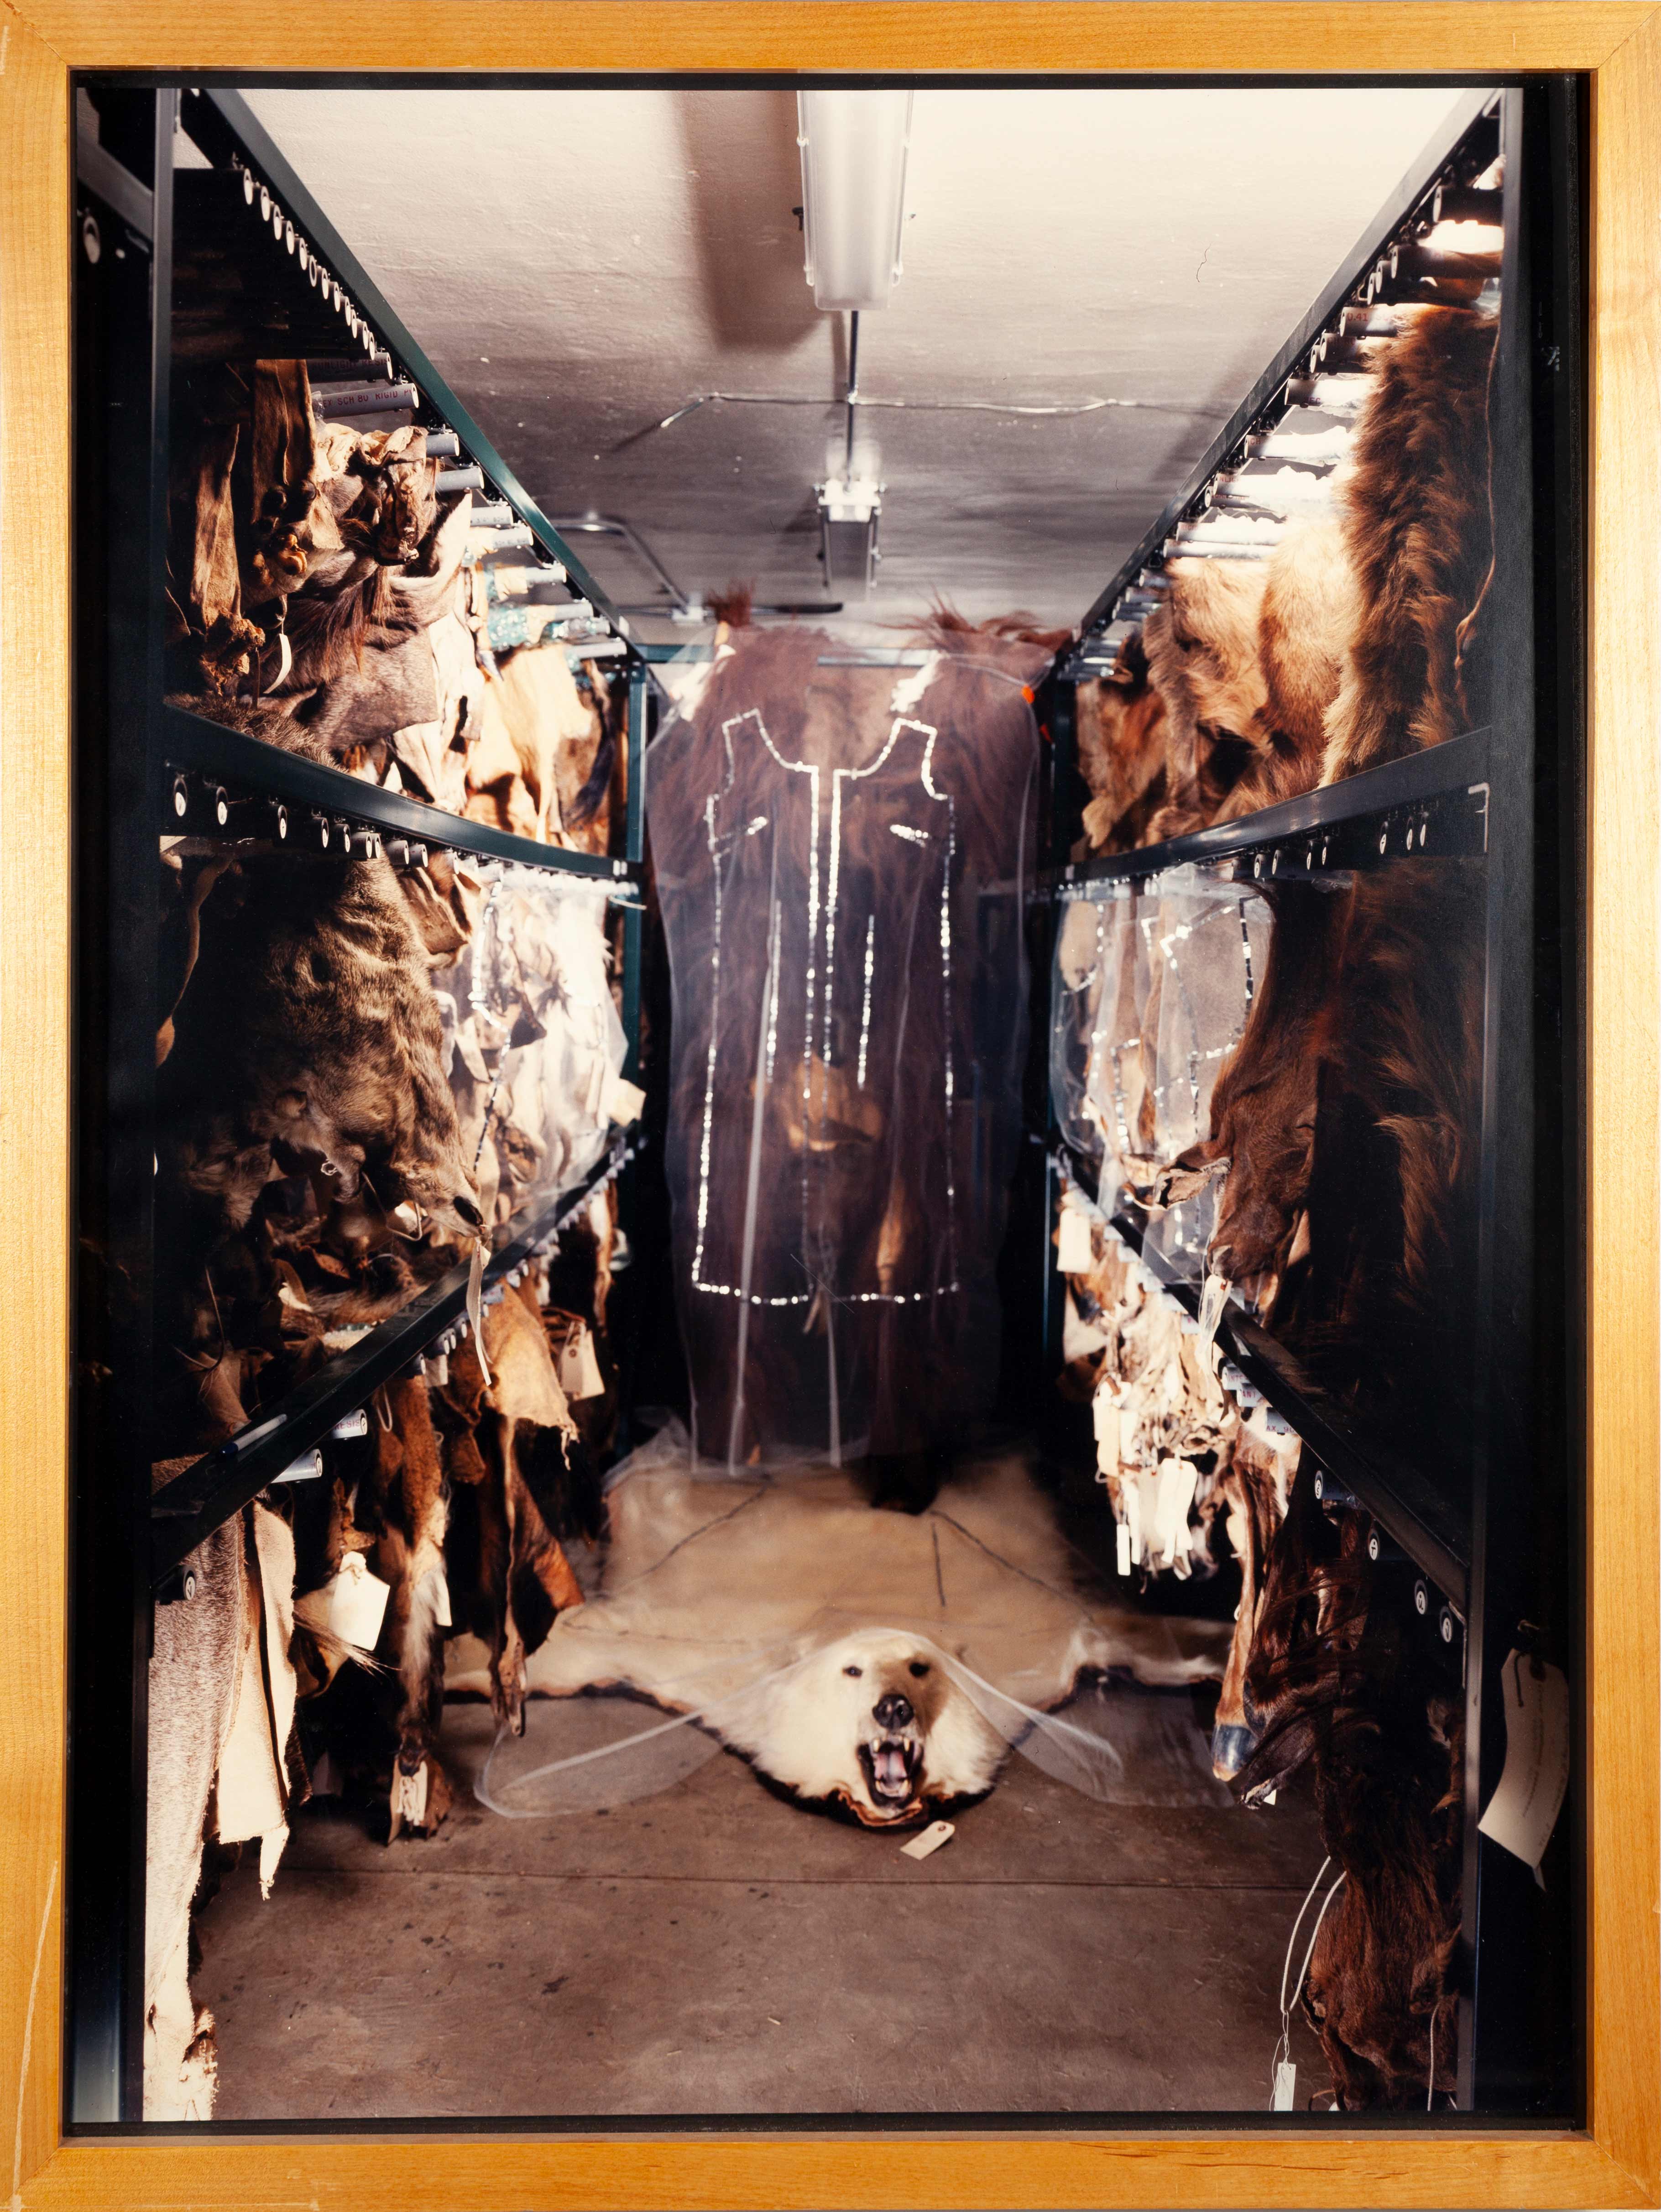 Photograph of a room with animal pelts.